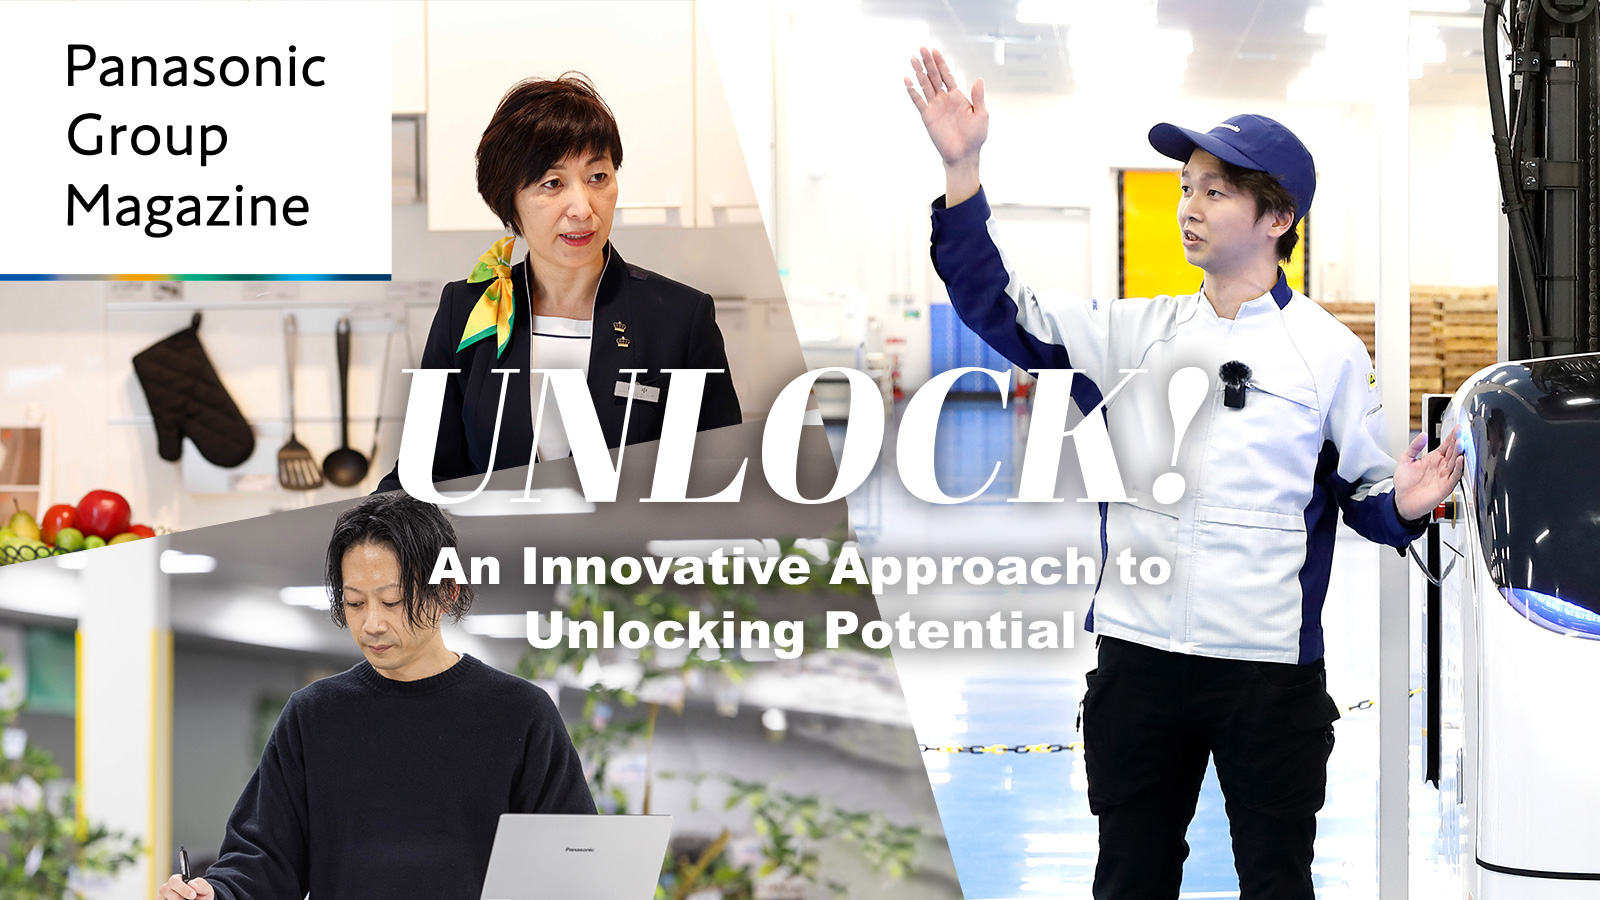 Panasonic Group Launches Online Magazine Internal newsletter to be made available to public